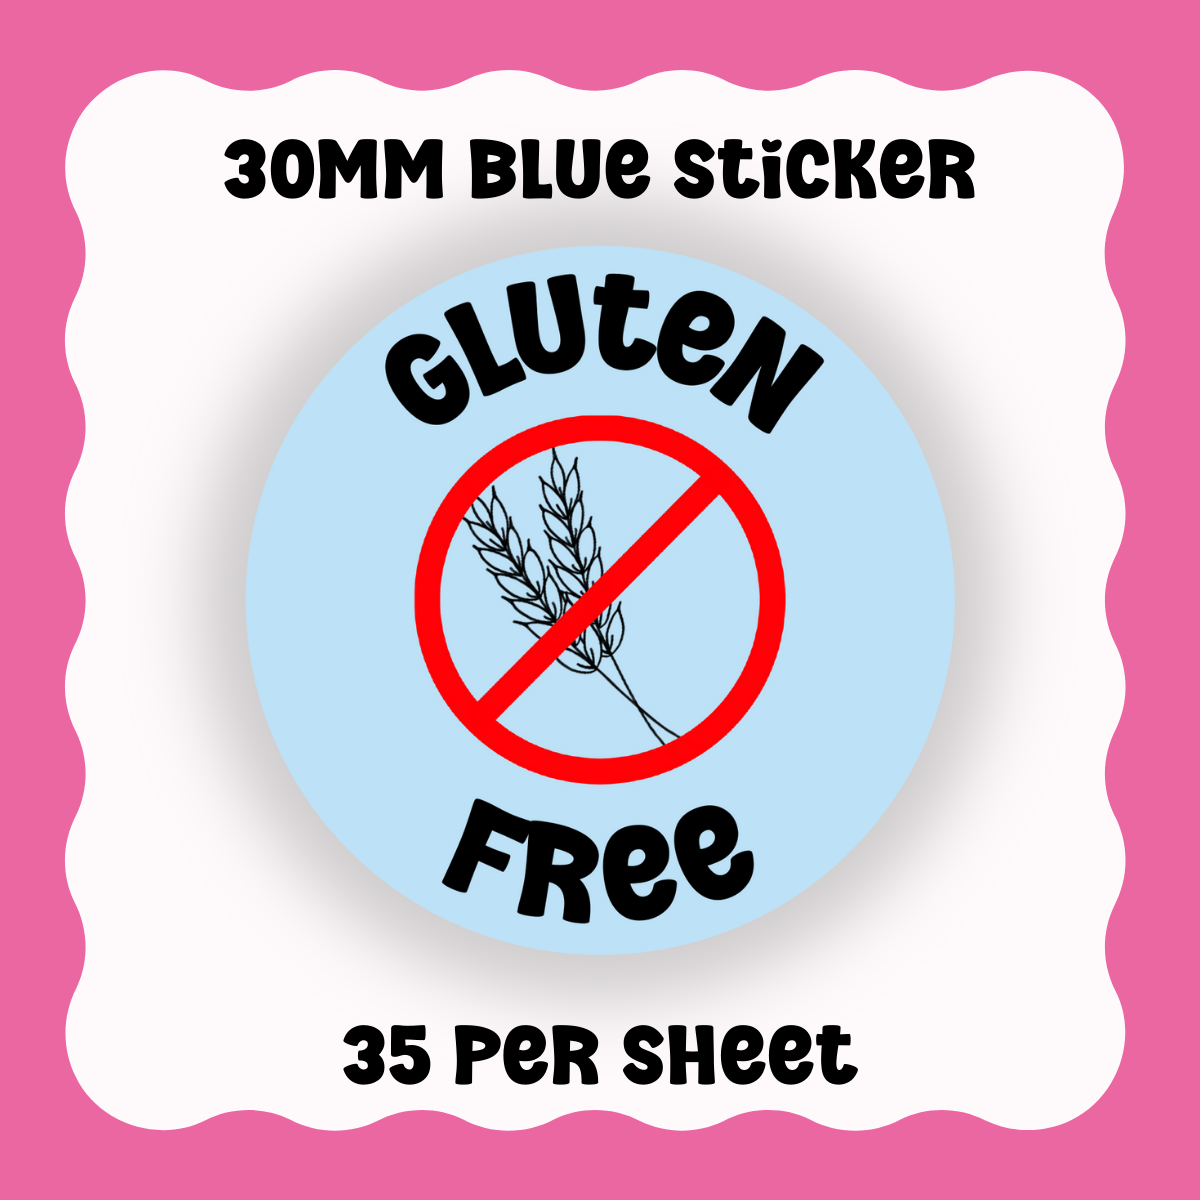 Gluten Free - With Graphic